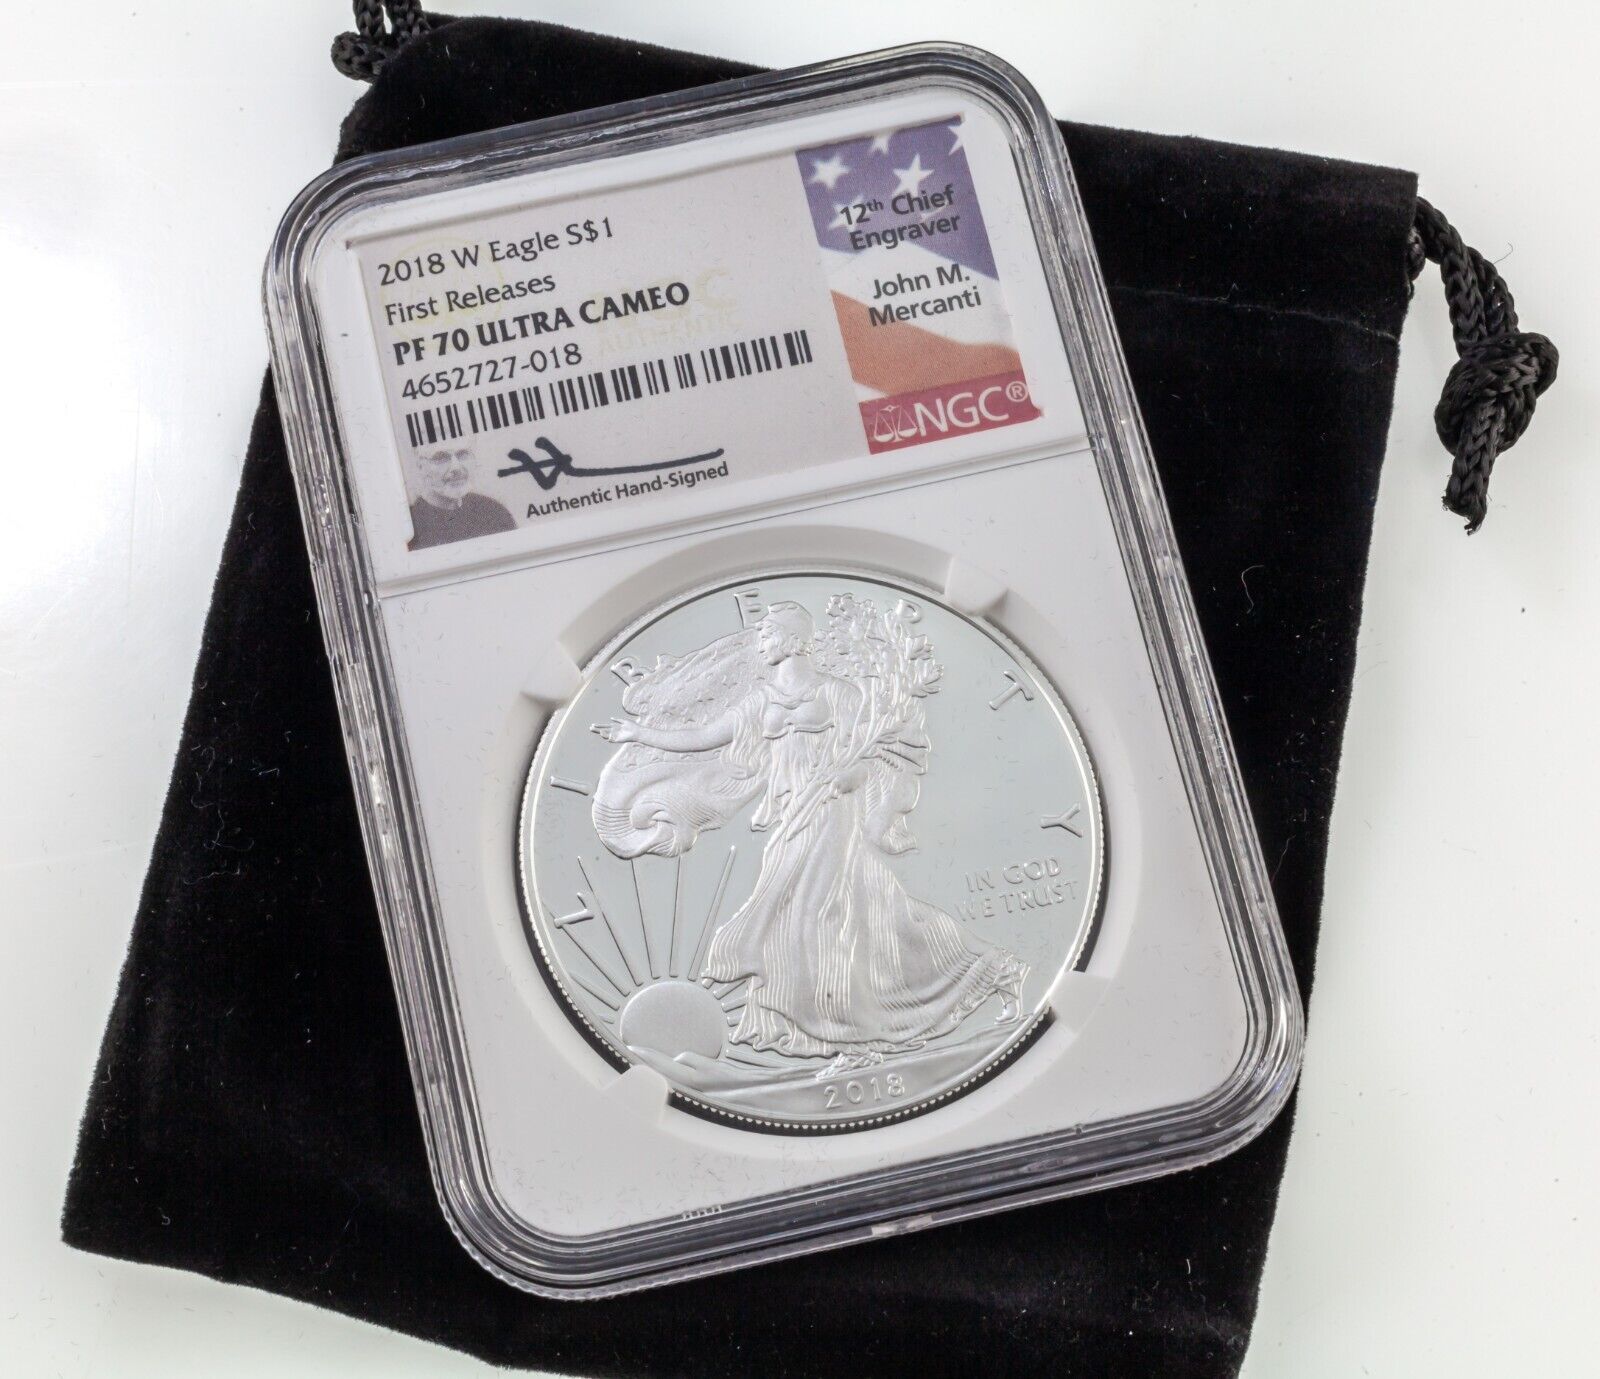 Primary image for 2018-W S$1 Silver American Eagle Graded by NGC as PF70 Ultra Cameo Mercanti